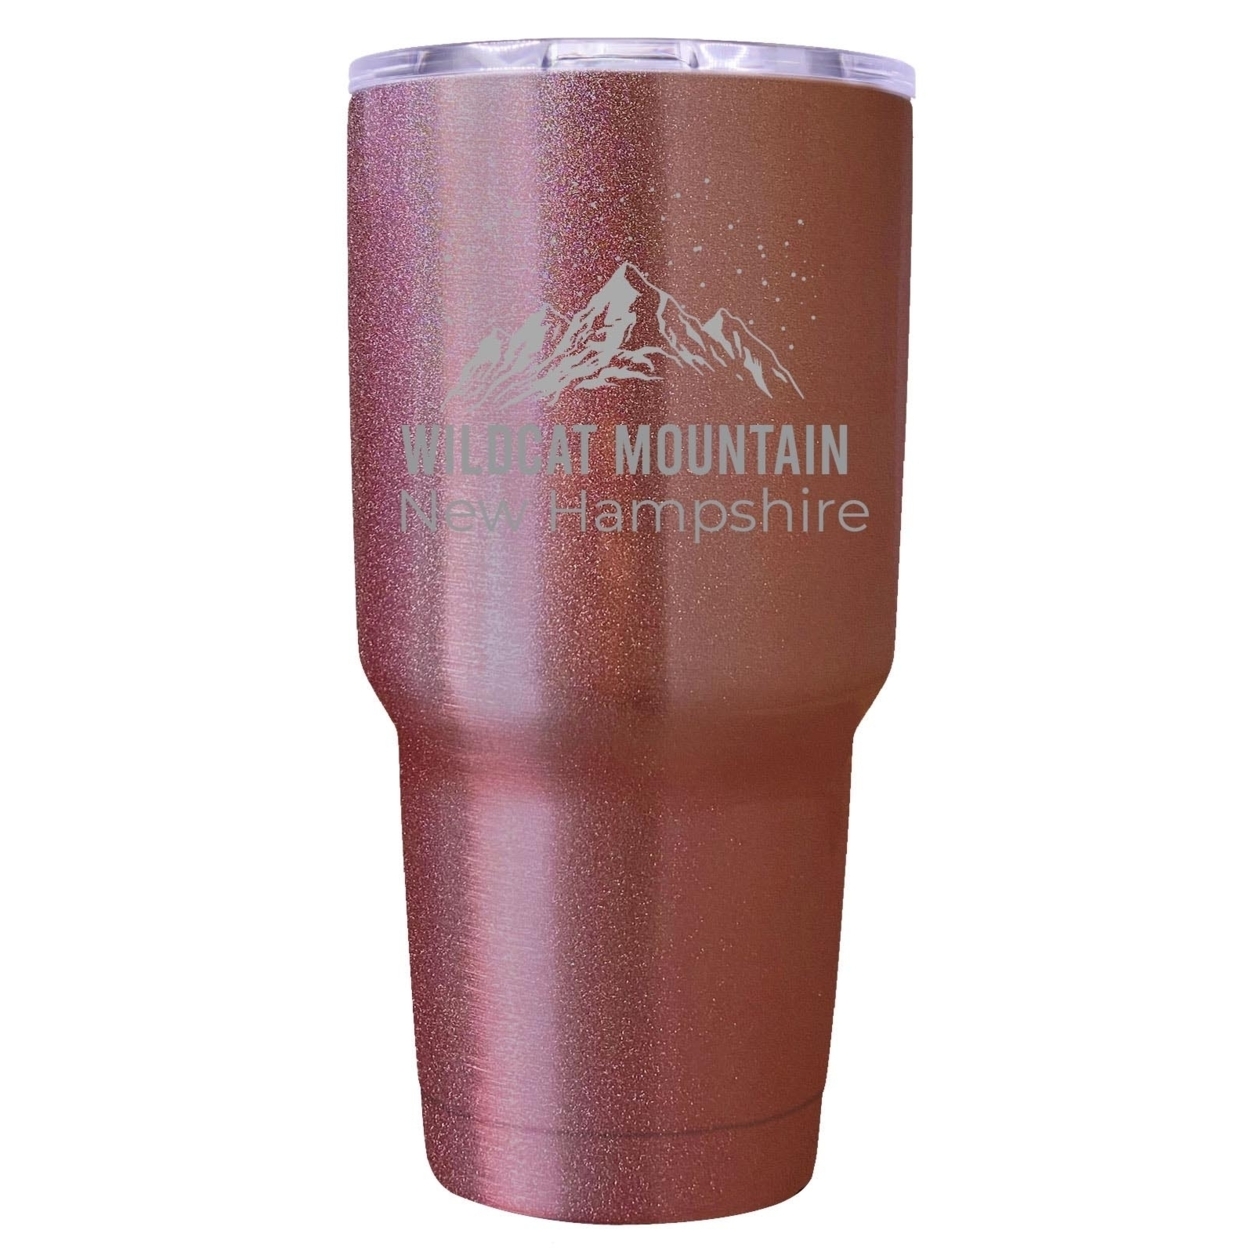 Wildcat Mountain New Hampshire Ski Snowboard Winter Souvenir Laser Engraved 24 Oz Insulated Stainless Steel Tumbler - Rose Gold